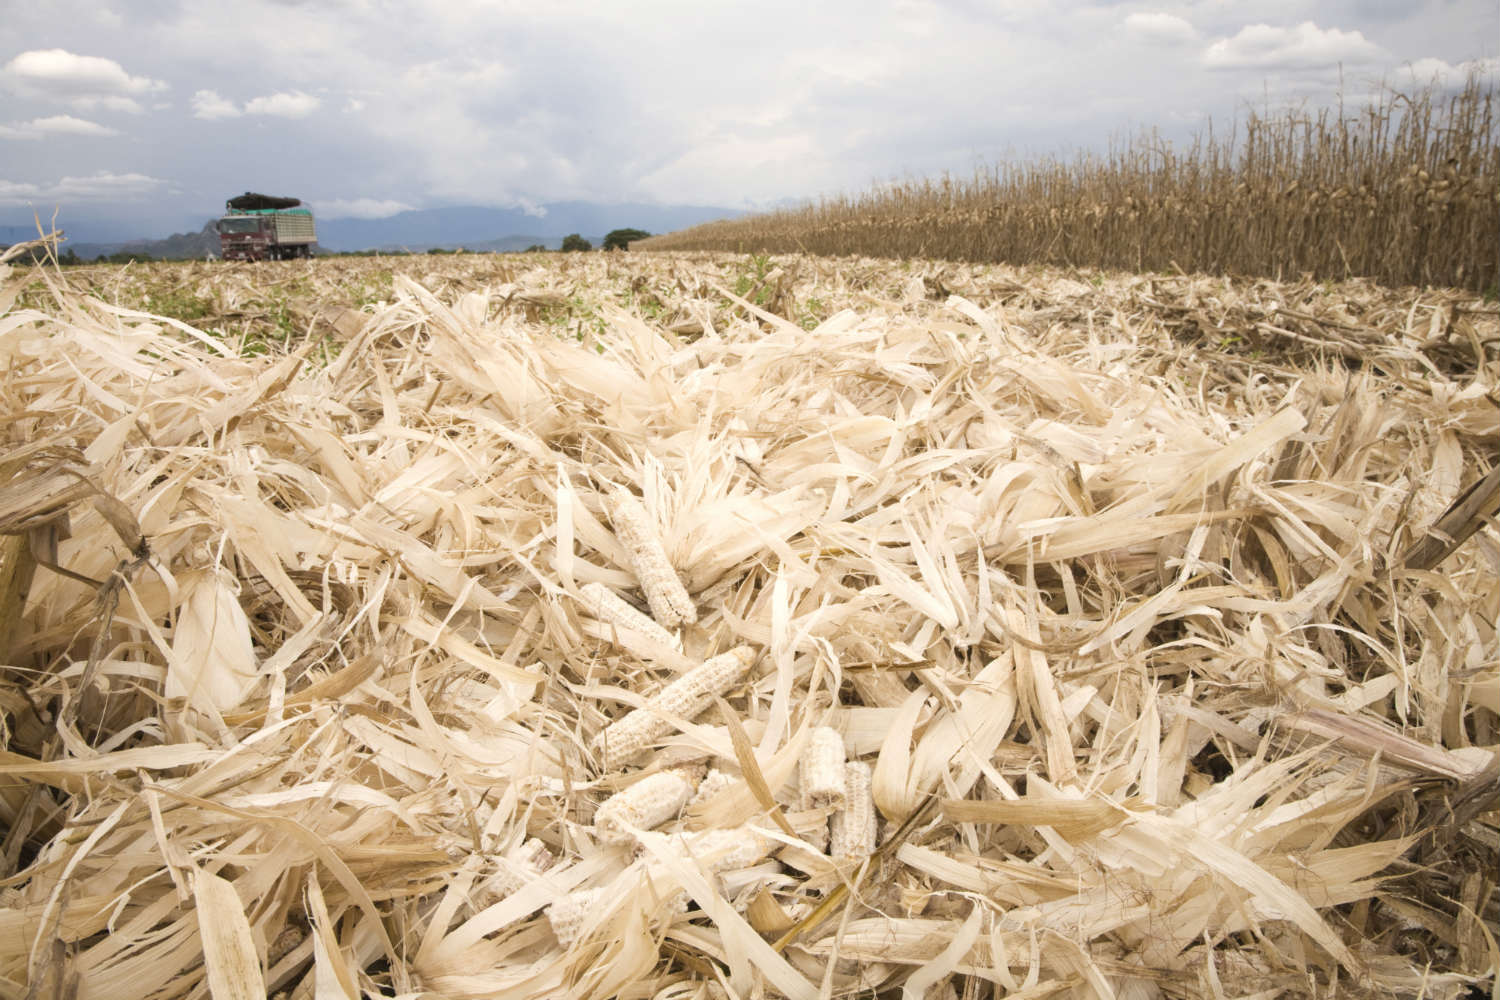 Corn waste used for biofuels